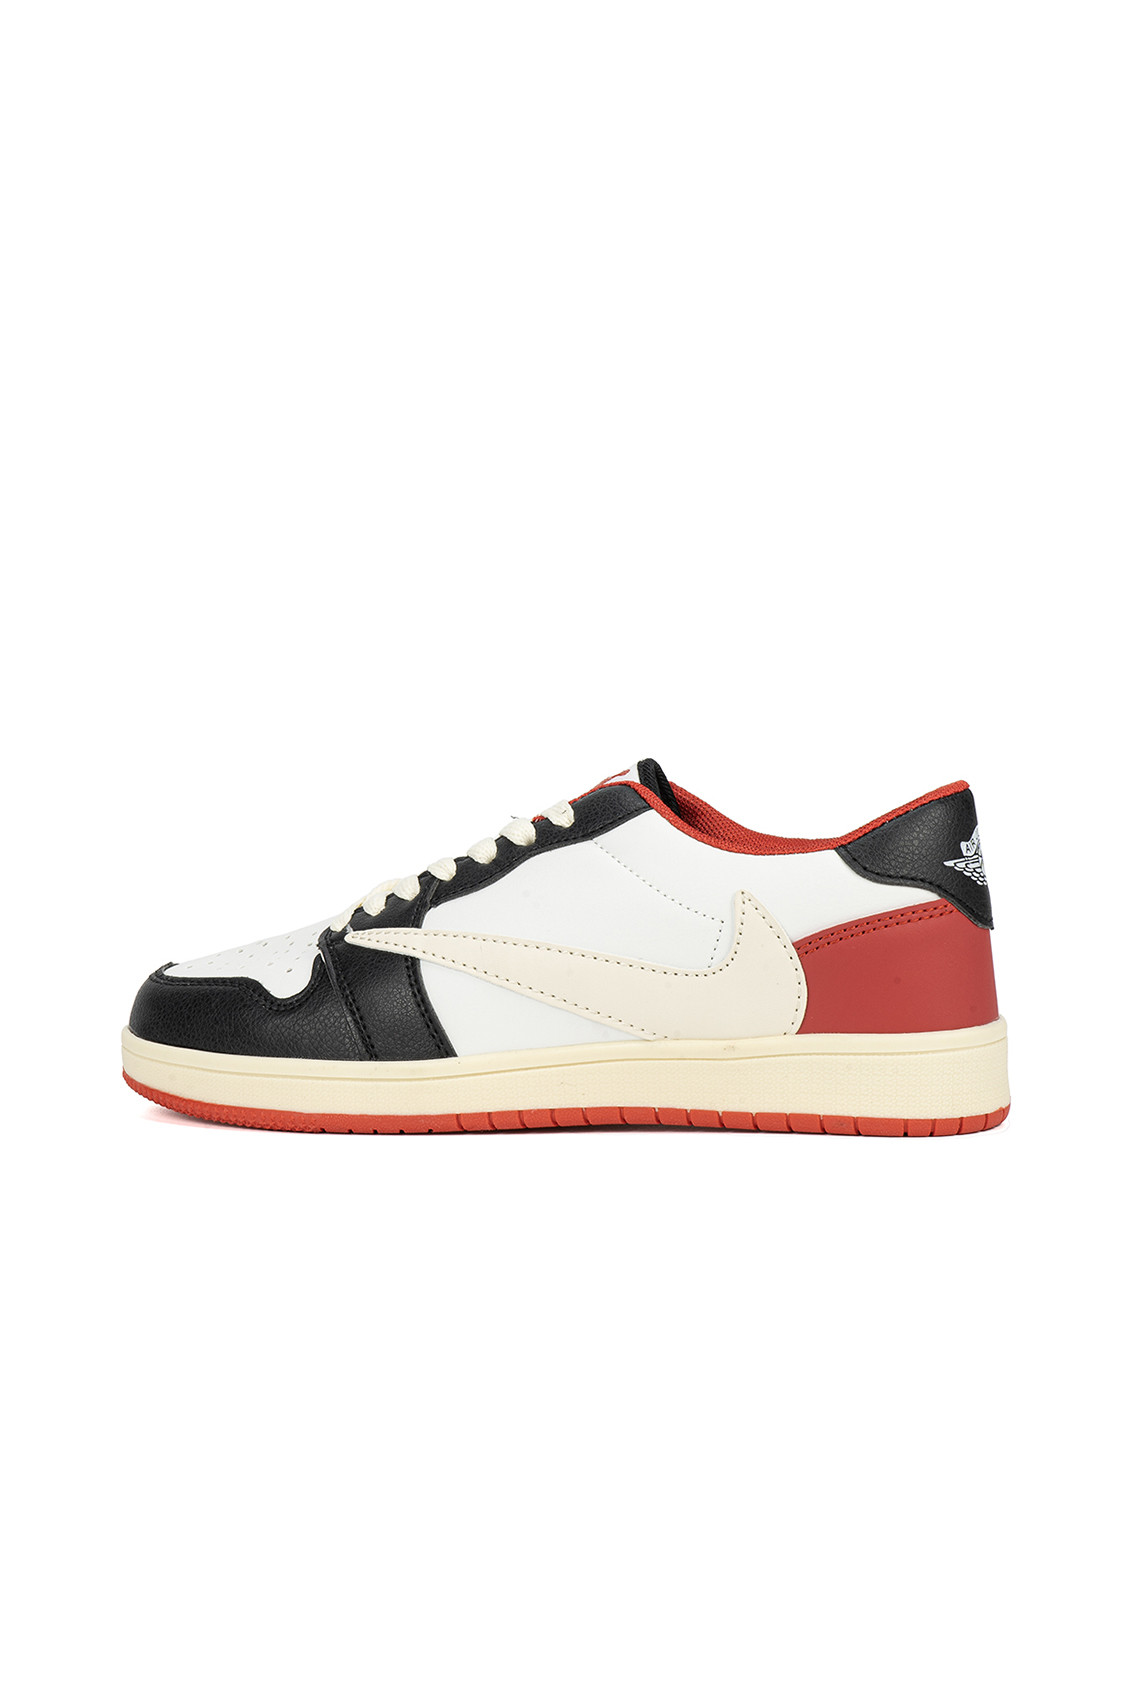 Espadrille Homme DRAME, Rouge, 41